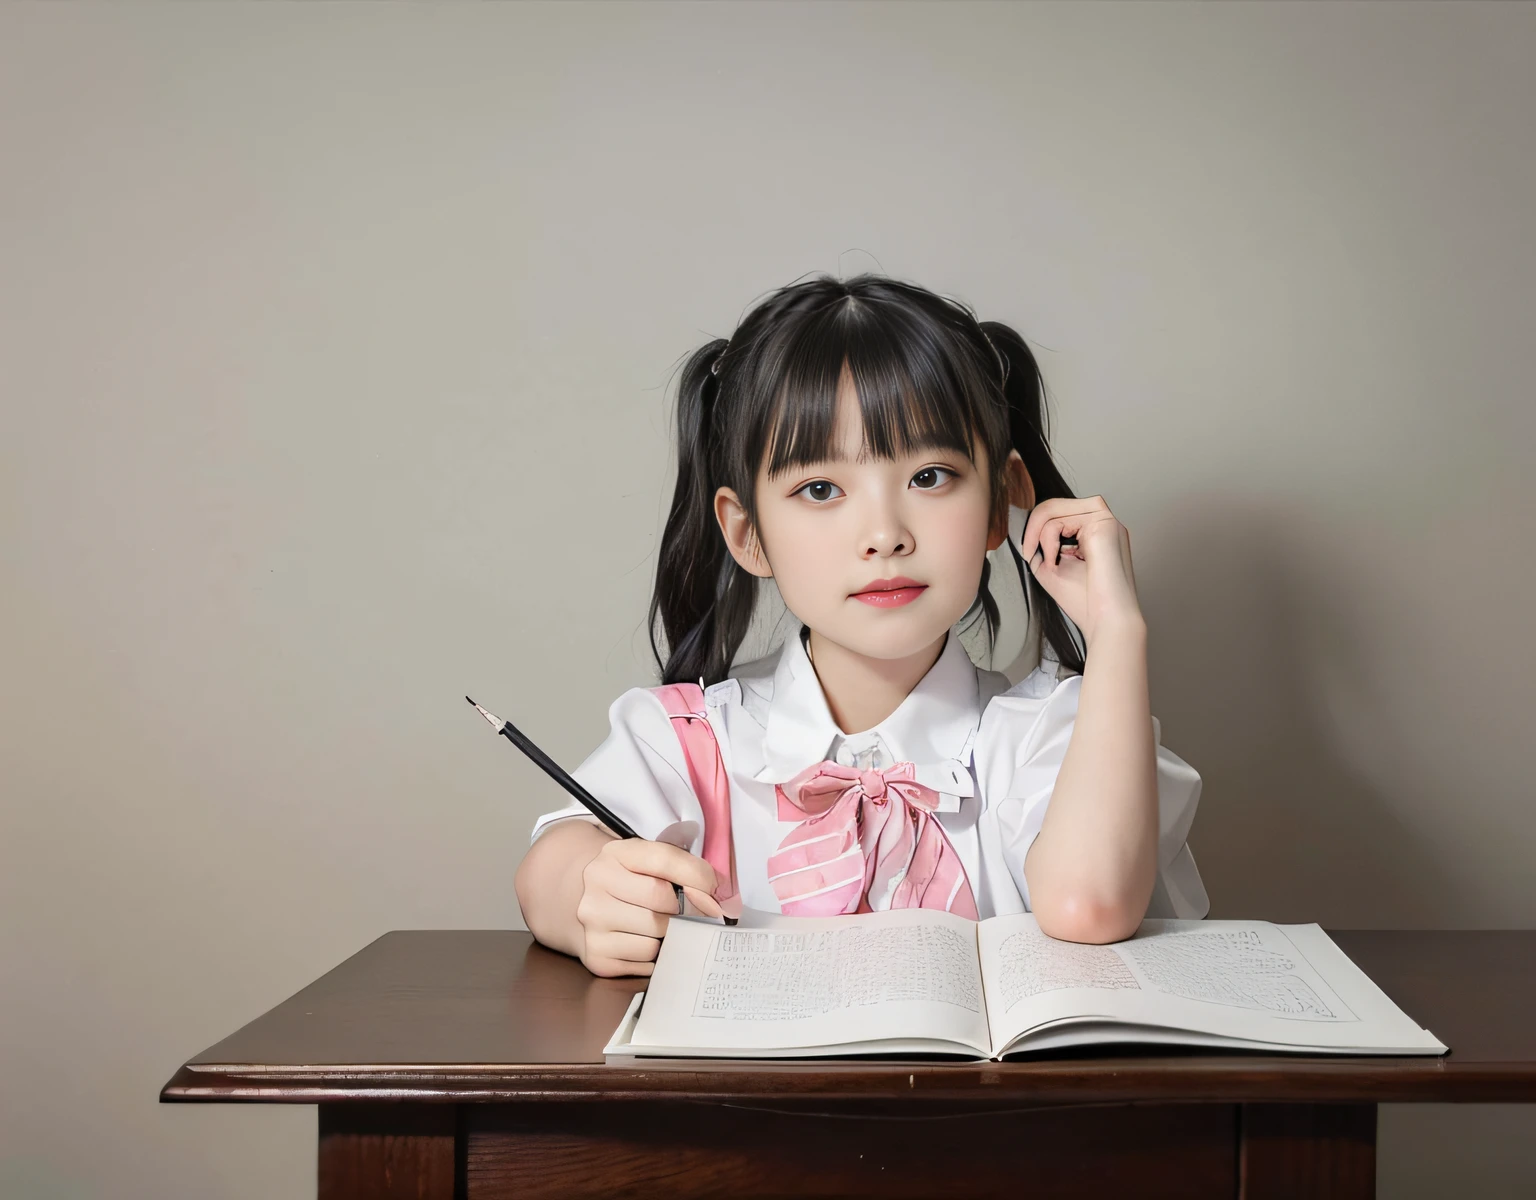 White Room，White windows，There was a young girl sitting at the table，Hold a book and pencil, two pigtails hairstyle, with black pigtails, kids drawing, braid hairstyle，Natural fingers。holding a pen，